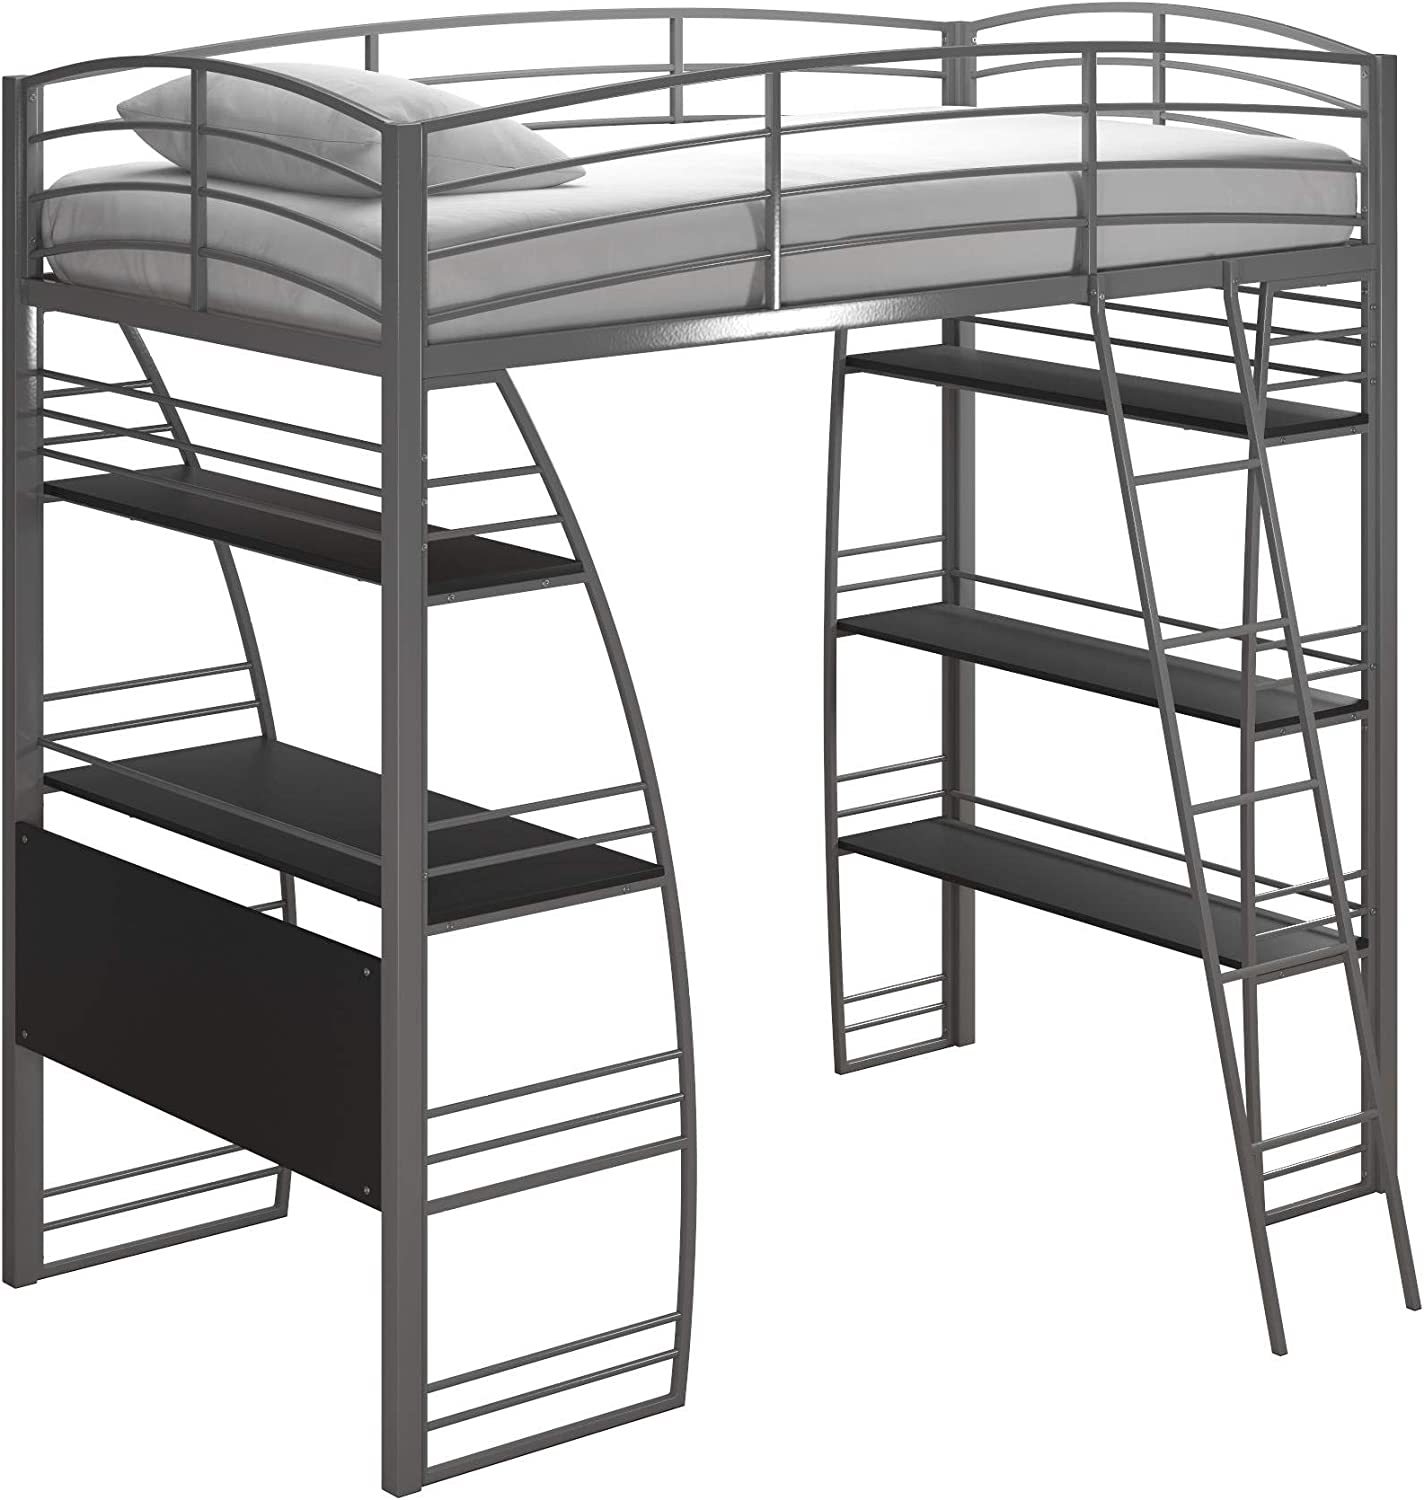 DHP Studio Loft Bunk Bed Over Desk and Bookcase with Metal Frame - Twin (Gray) - $320.99